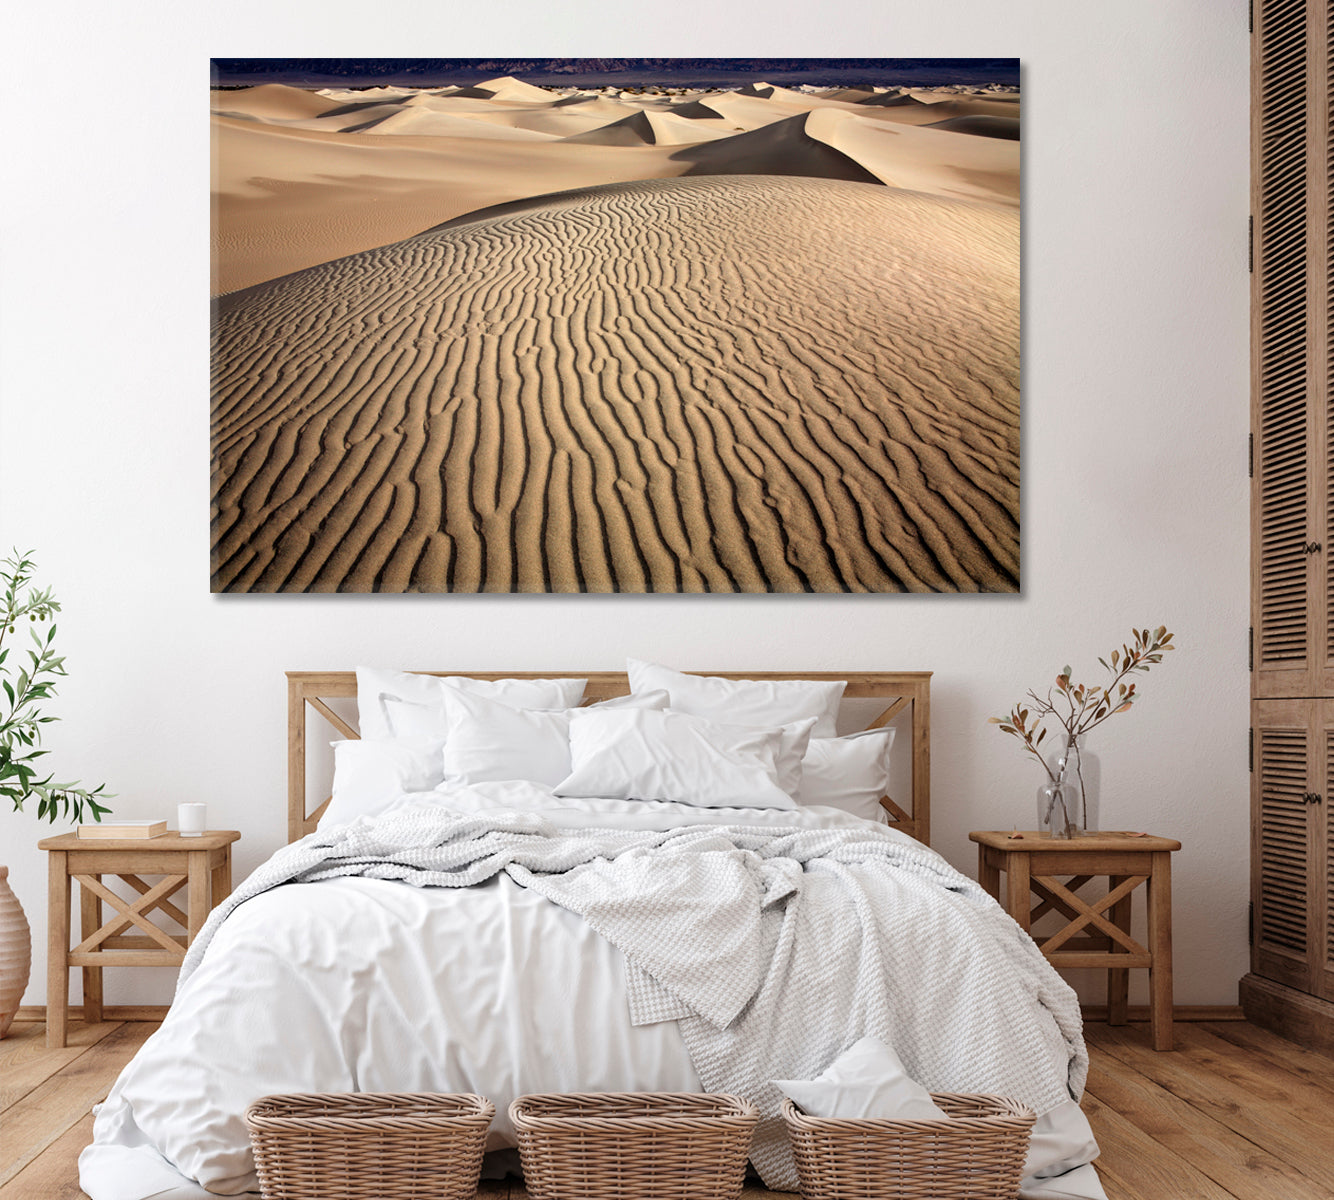 Death Valley National Park California Canvas Print ArtLexy 1 Panel 24"x16" inches 